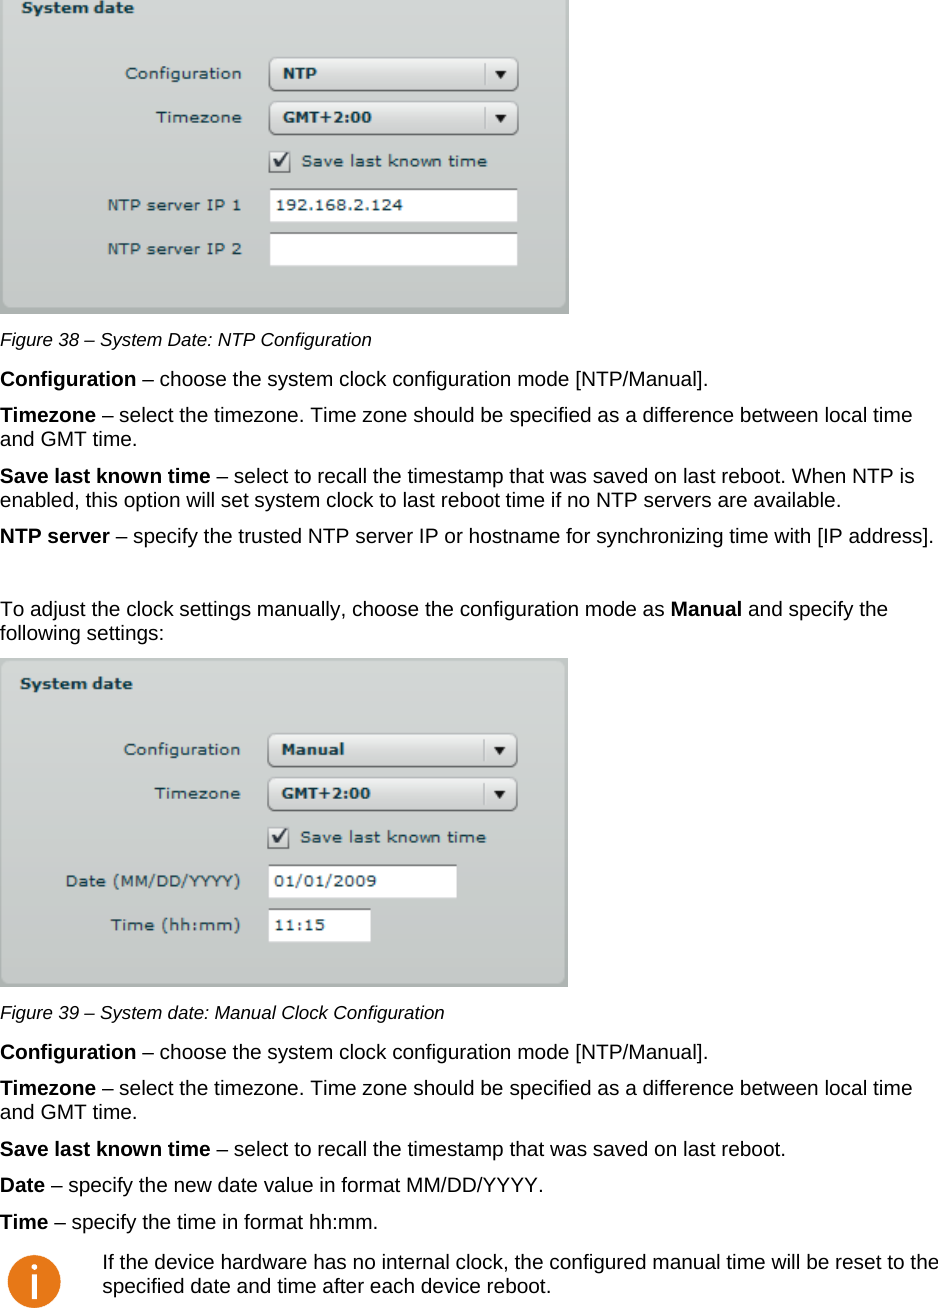  LigoWave Page 34  Figure 38 – System Date: NTP Configuration Configuration – choose the system clock configuration mode [NTP/Manual].  Timezone – select the timezone. Time zone should be specified as a difference between local time and GMT time.  Save last known time – select to recall the timestamp that was saved on last reboot. When NTP is enabled, this option will set system clock to last reboot time if no NTP servers are available.  NTP server – specify the trusted NTP server IP or hostname for synchronizing time with [IP address].   To adjust the clock settings manually, choose the configuration mode as Manual and specify the following settings:   Figure 39 – System date: Manual Clock Configuration Configuration – choose the system clock configuration mode [NTP/Manual].  Timezone – select the timezone. Time zone should be specified as a difference between local time and GMT time.  Save last known time – select to recall the timestamp that was saved on last reboot.  Date – specify the new date value in format MM/DD/YYYY. Time – specify the time in format hh:mm.   If the device hardware has no internal clock, the configured manual time will be reset to the specified date and time after each device reboot.  